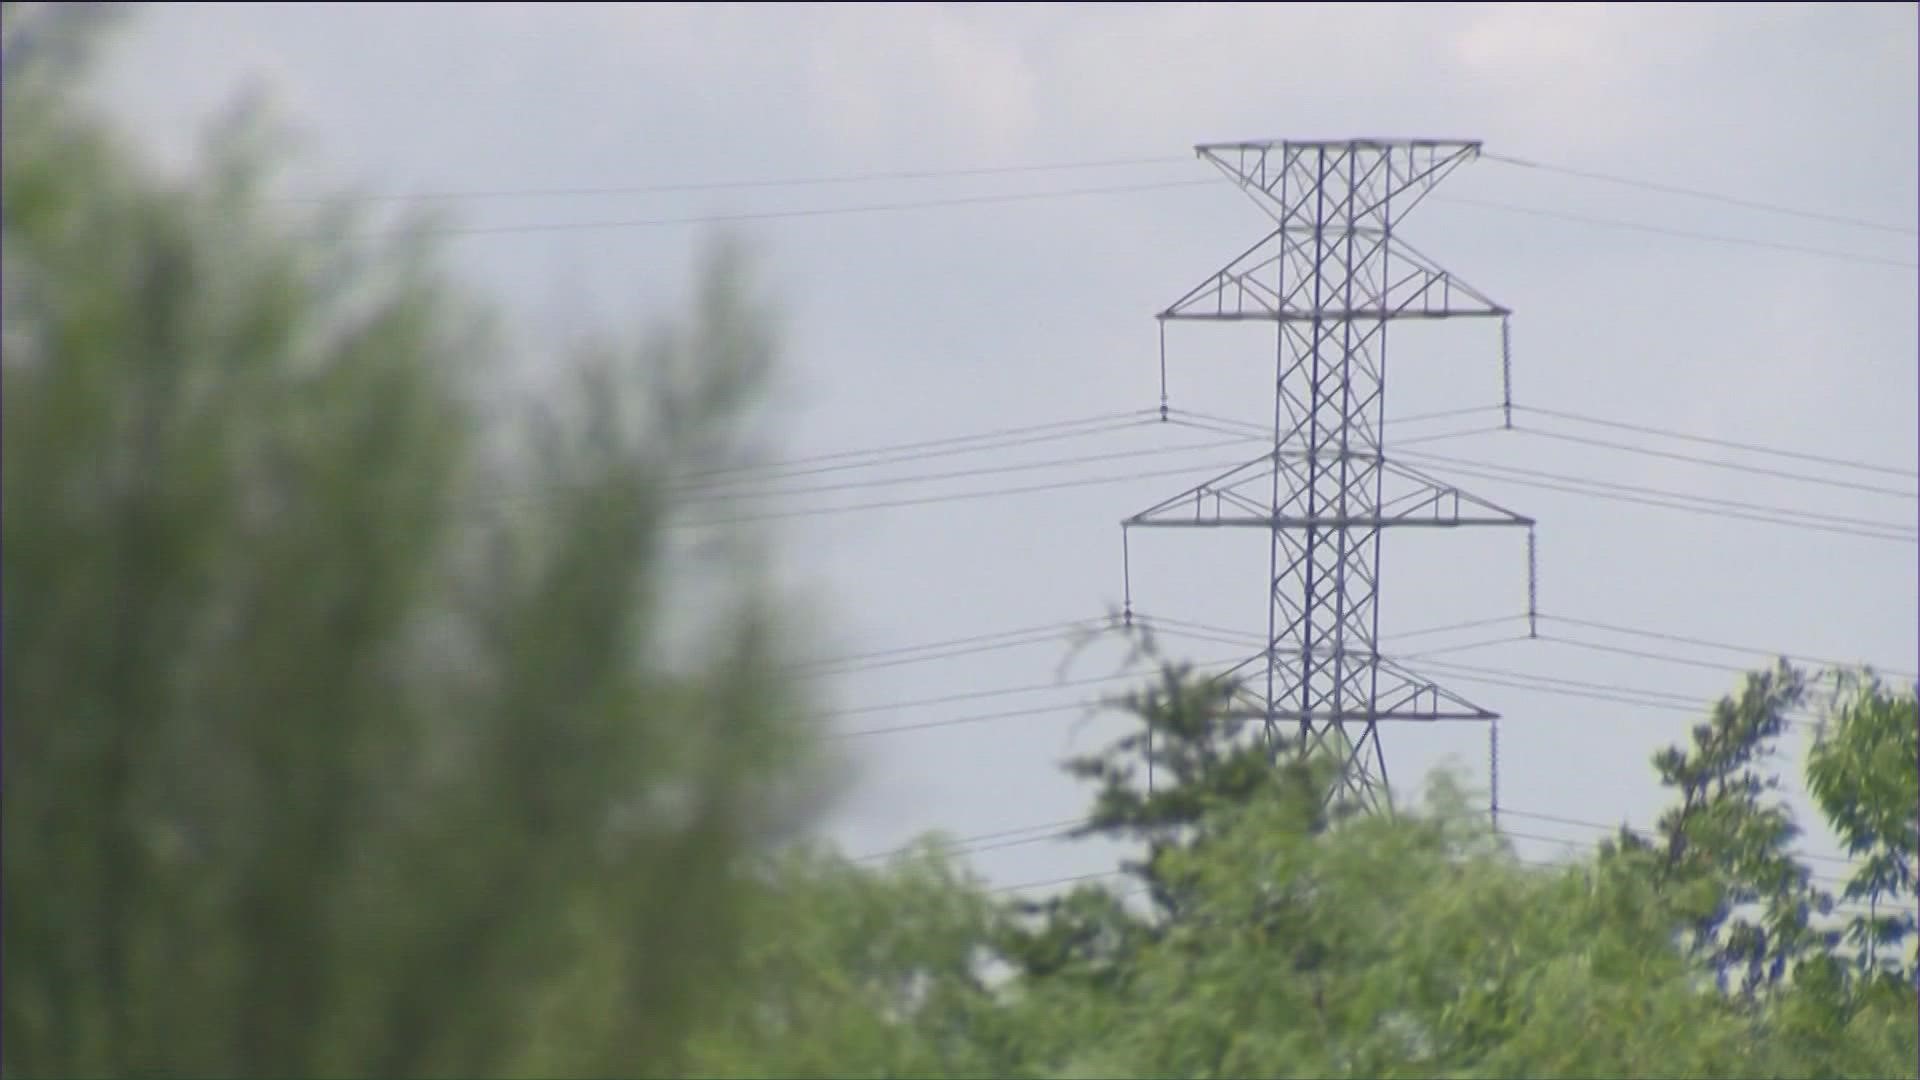 Leaders in the state power grid say they had a successful summer.